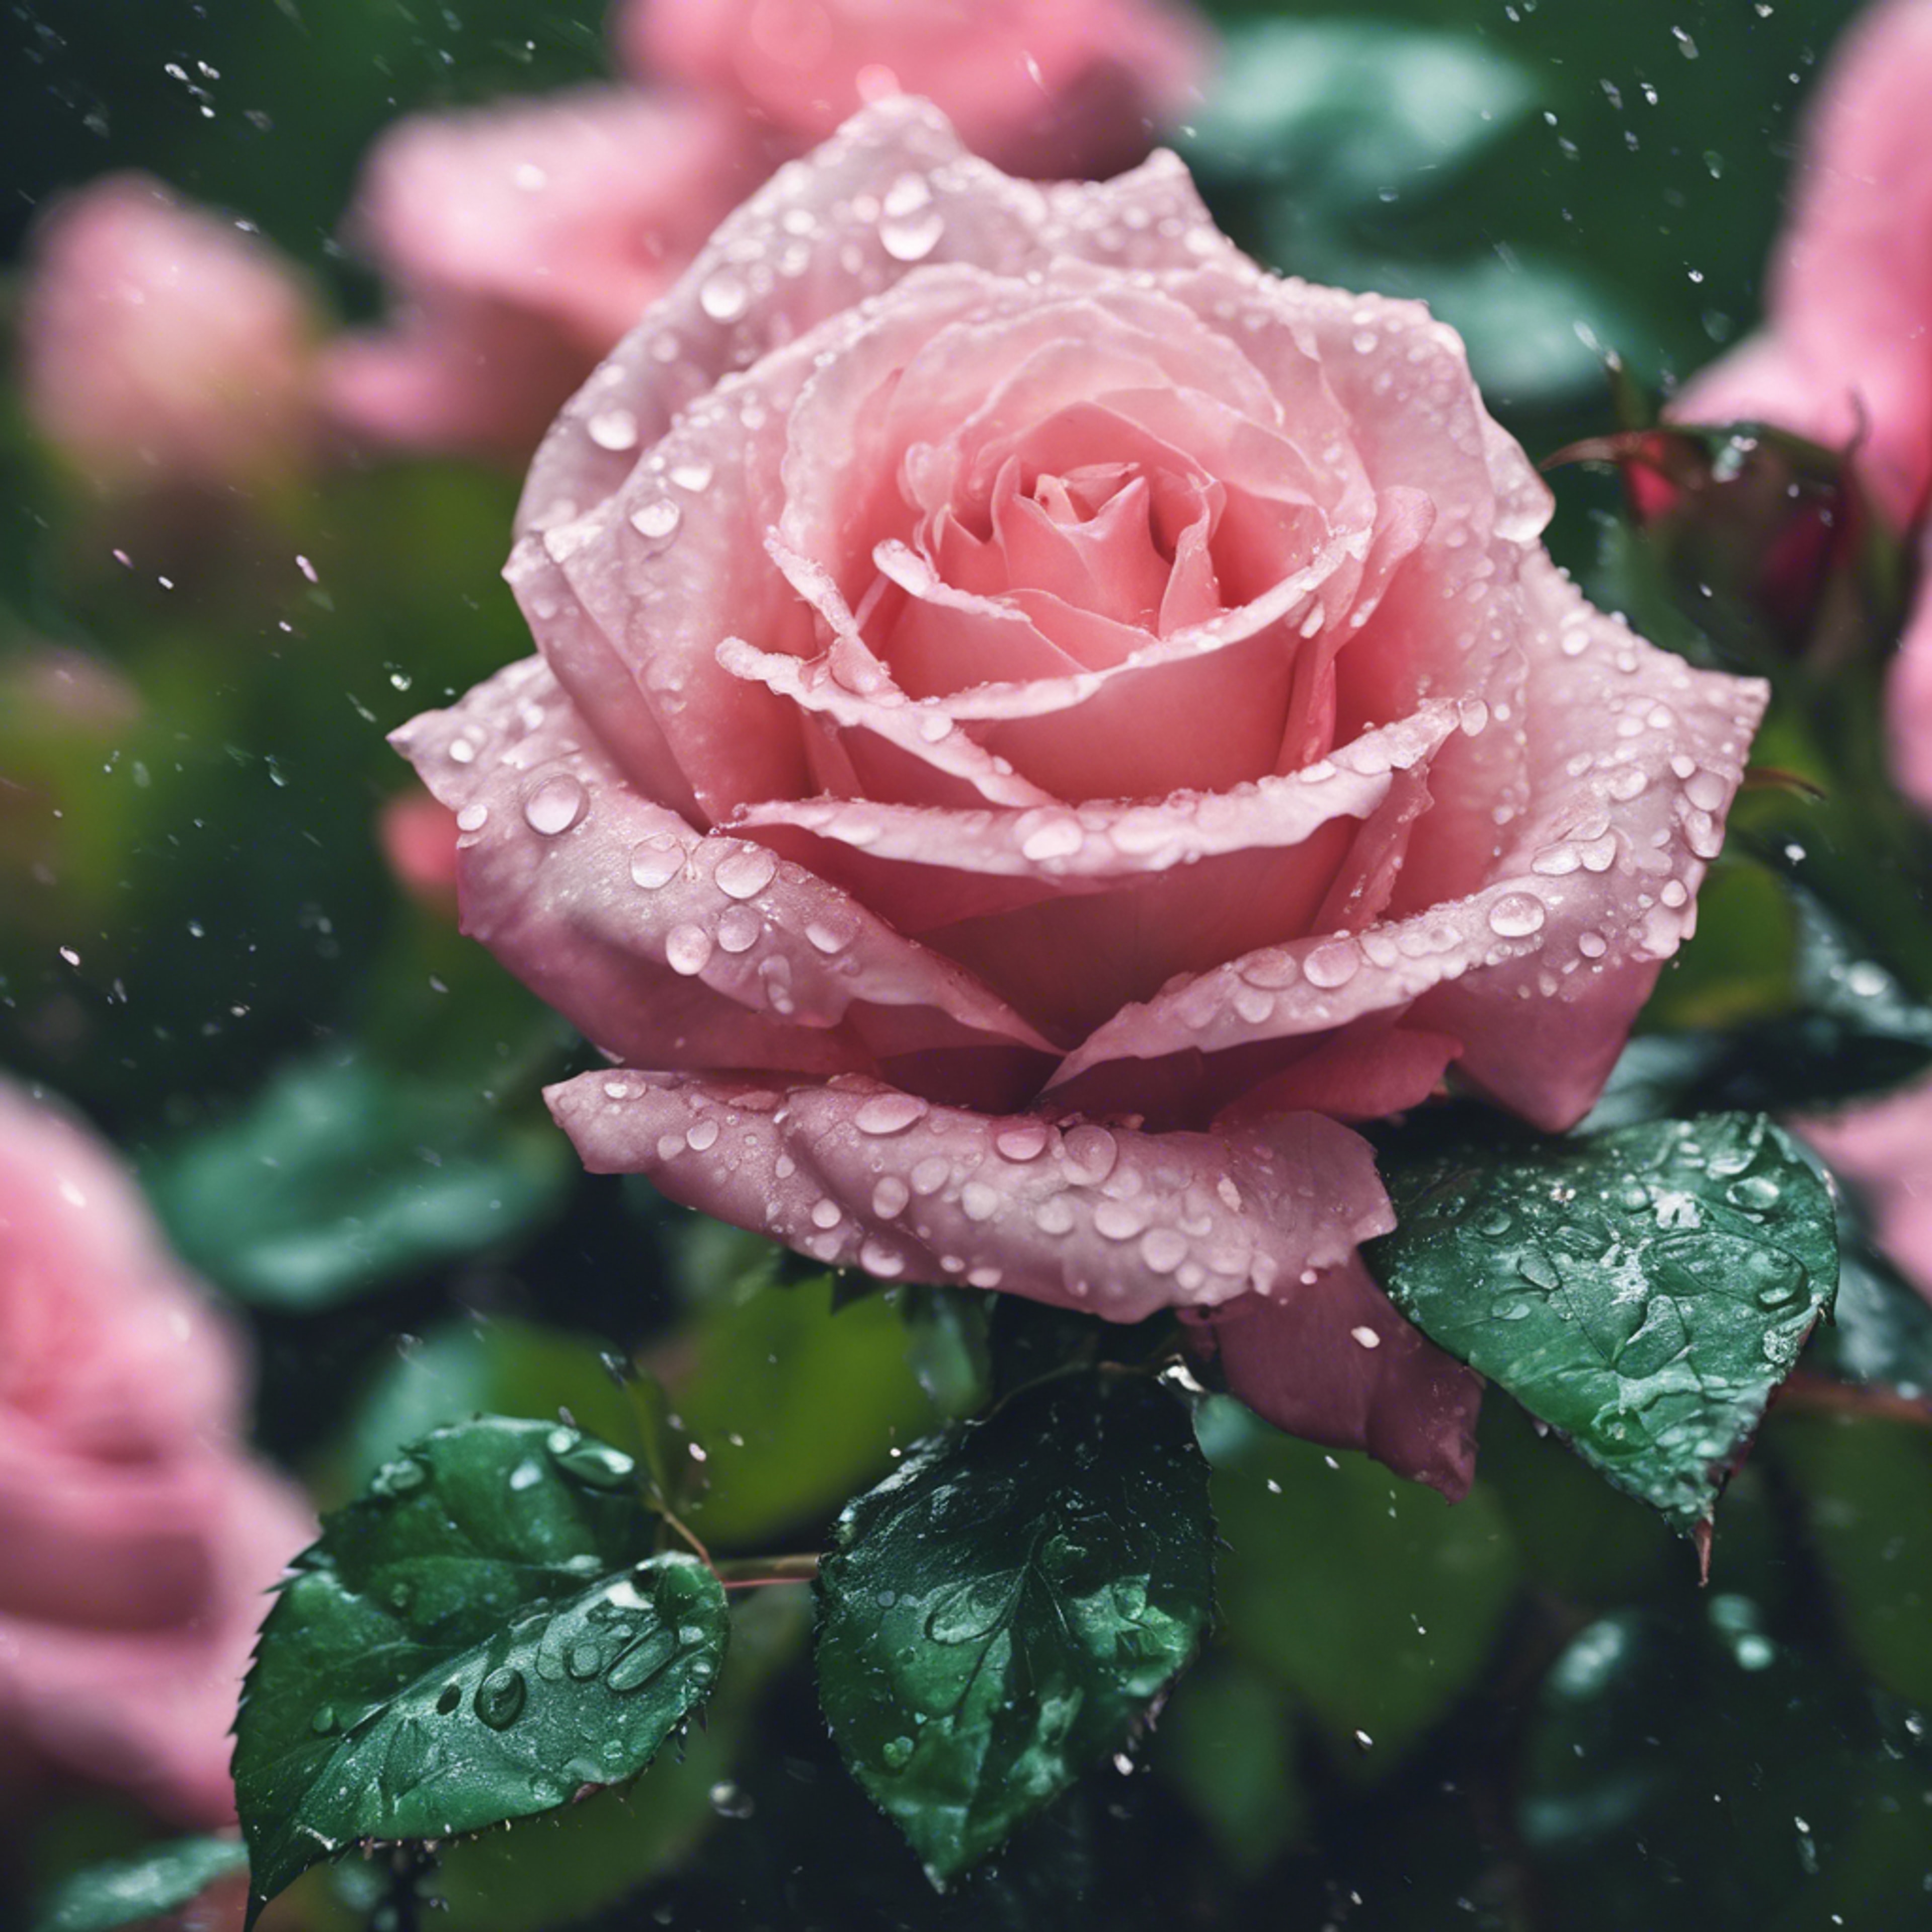 Gentle rain falling on the bright green leaves and pink roses. 牆紙[2479f95970de45b492b9]